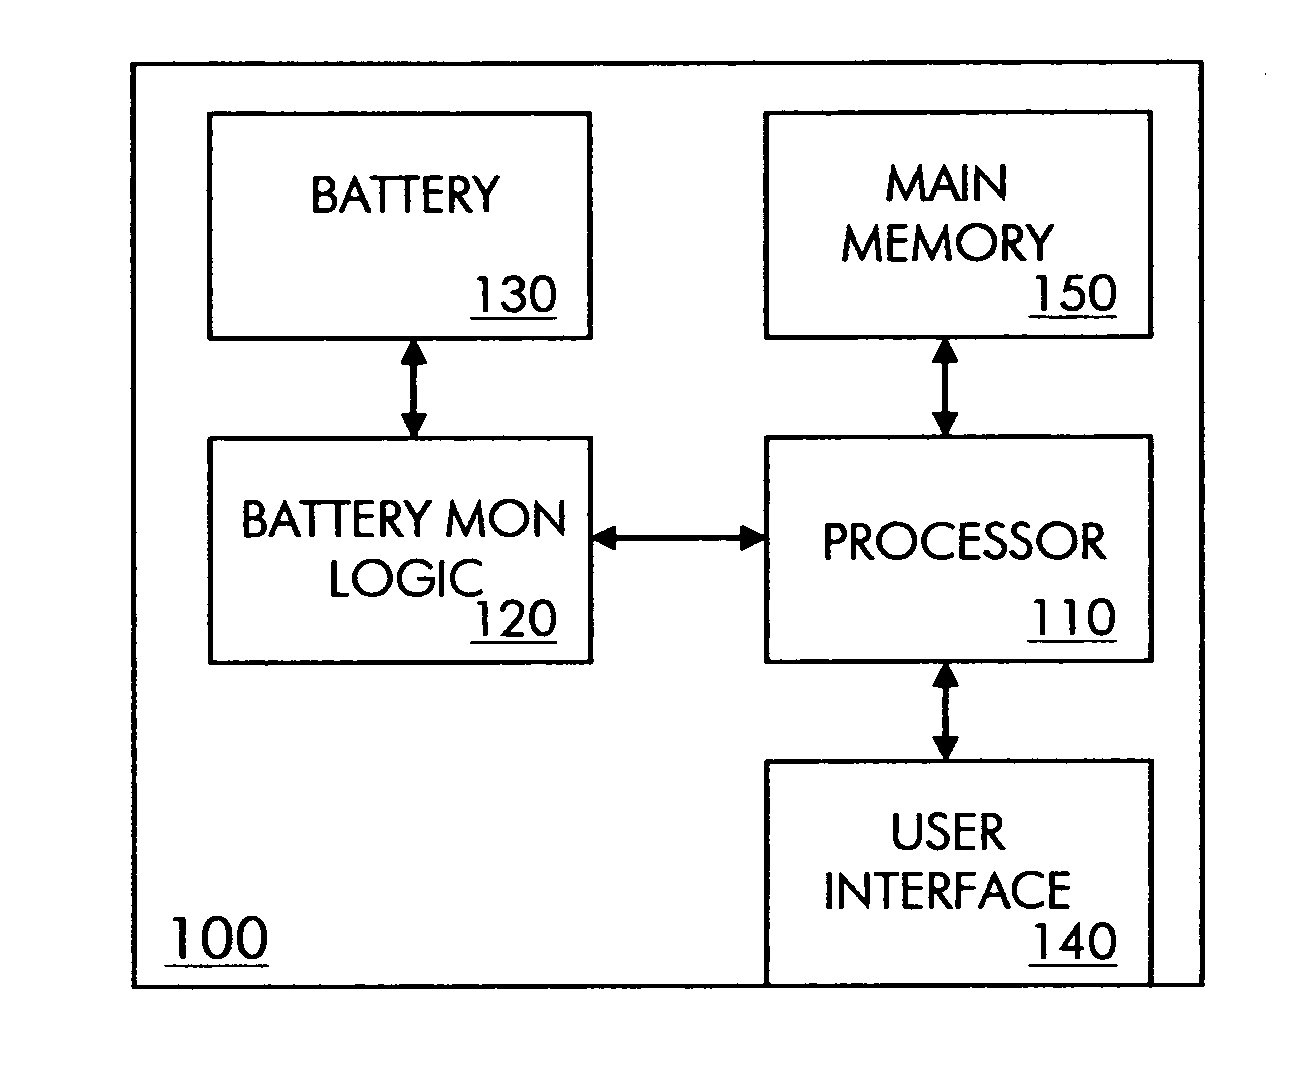 Virtual batteries for wireless communication device